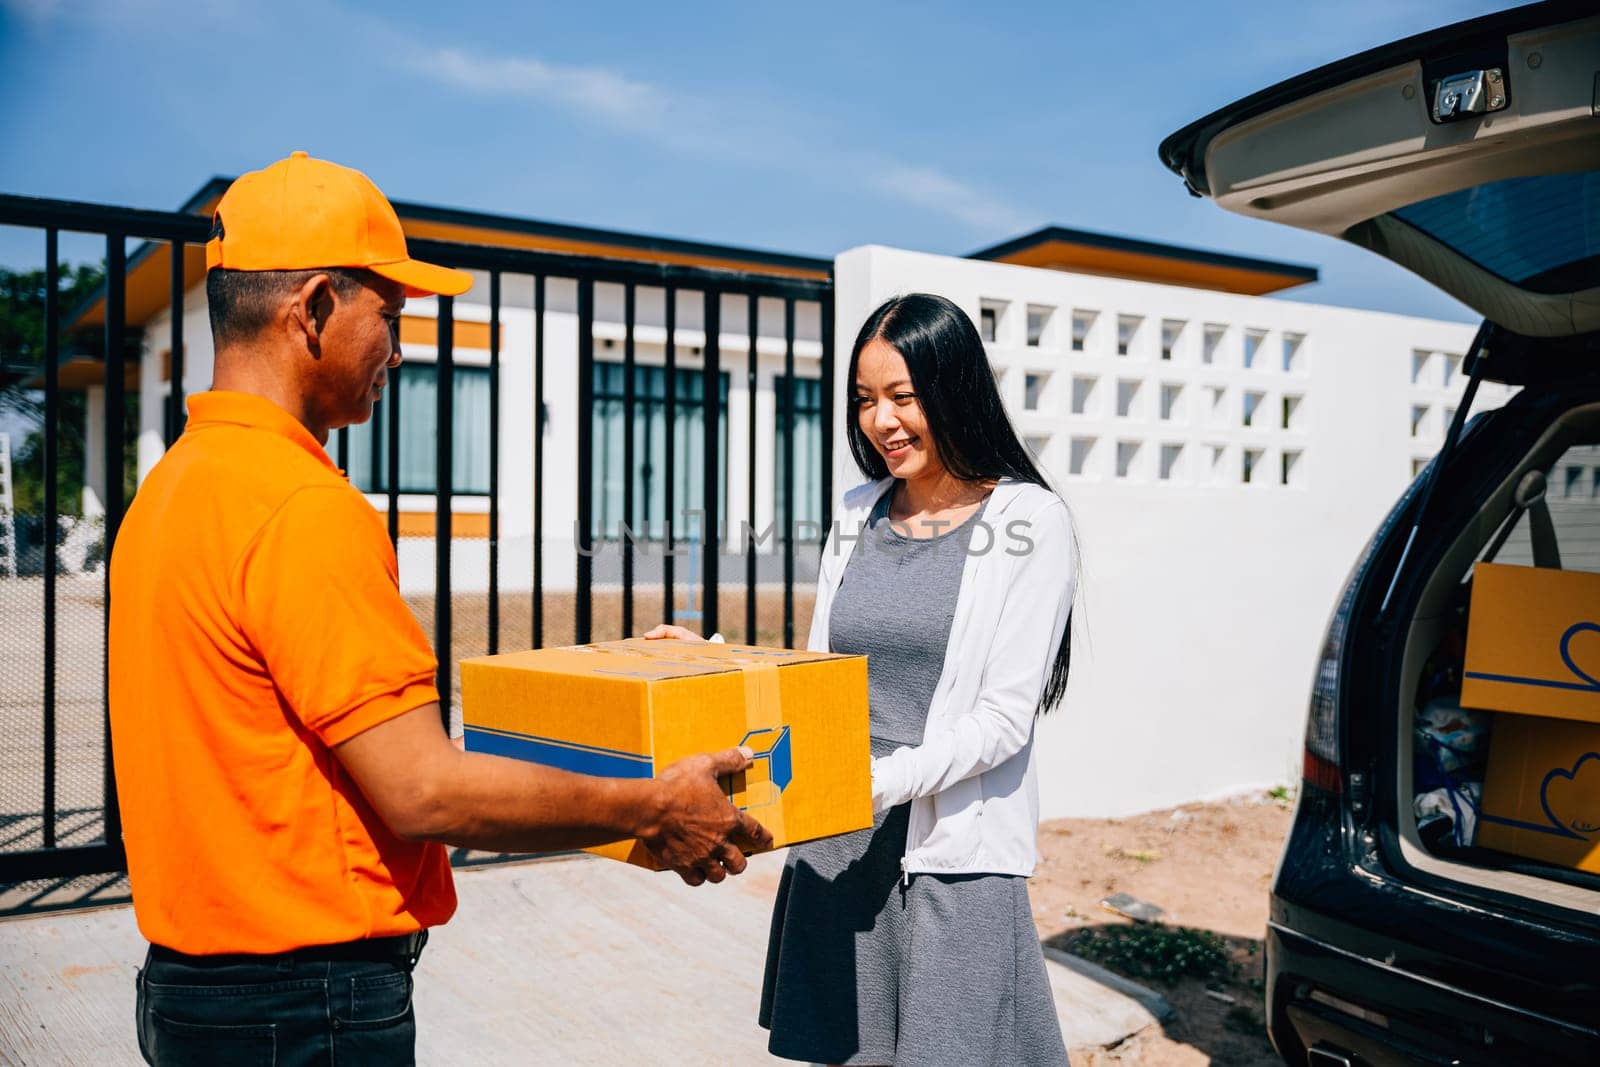 Efficient home delivery logistics depicted as a courier delivers a cardboard parcel to a smiling woman by Sorapop